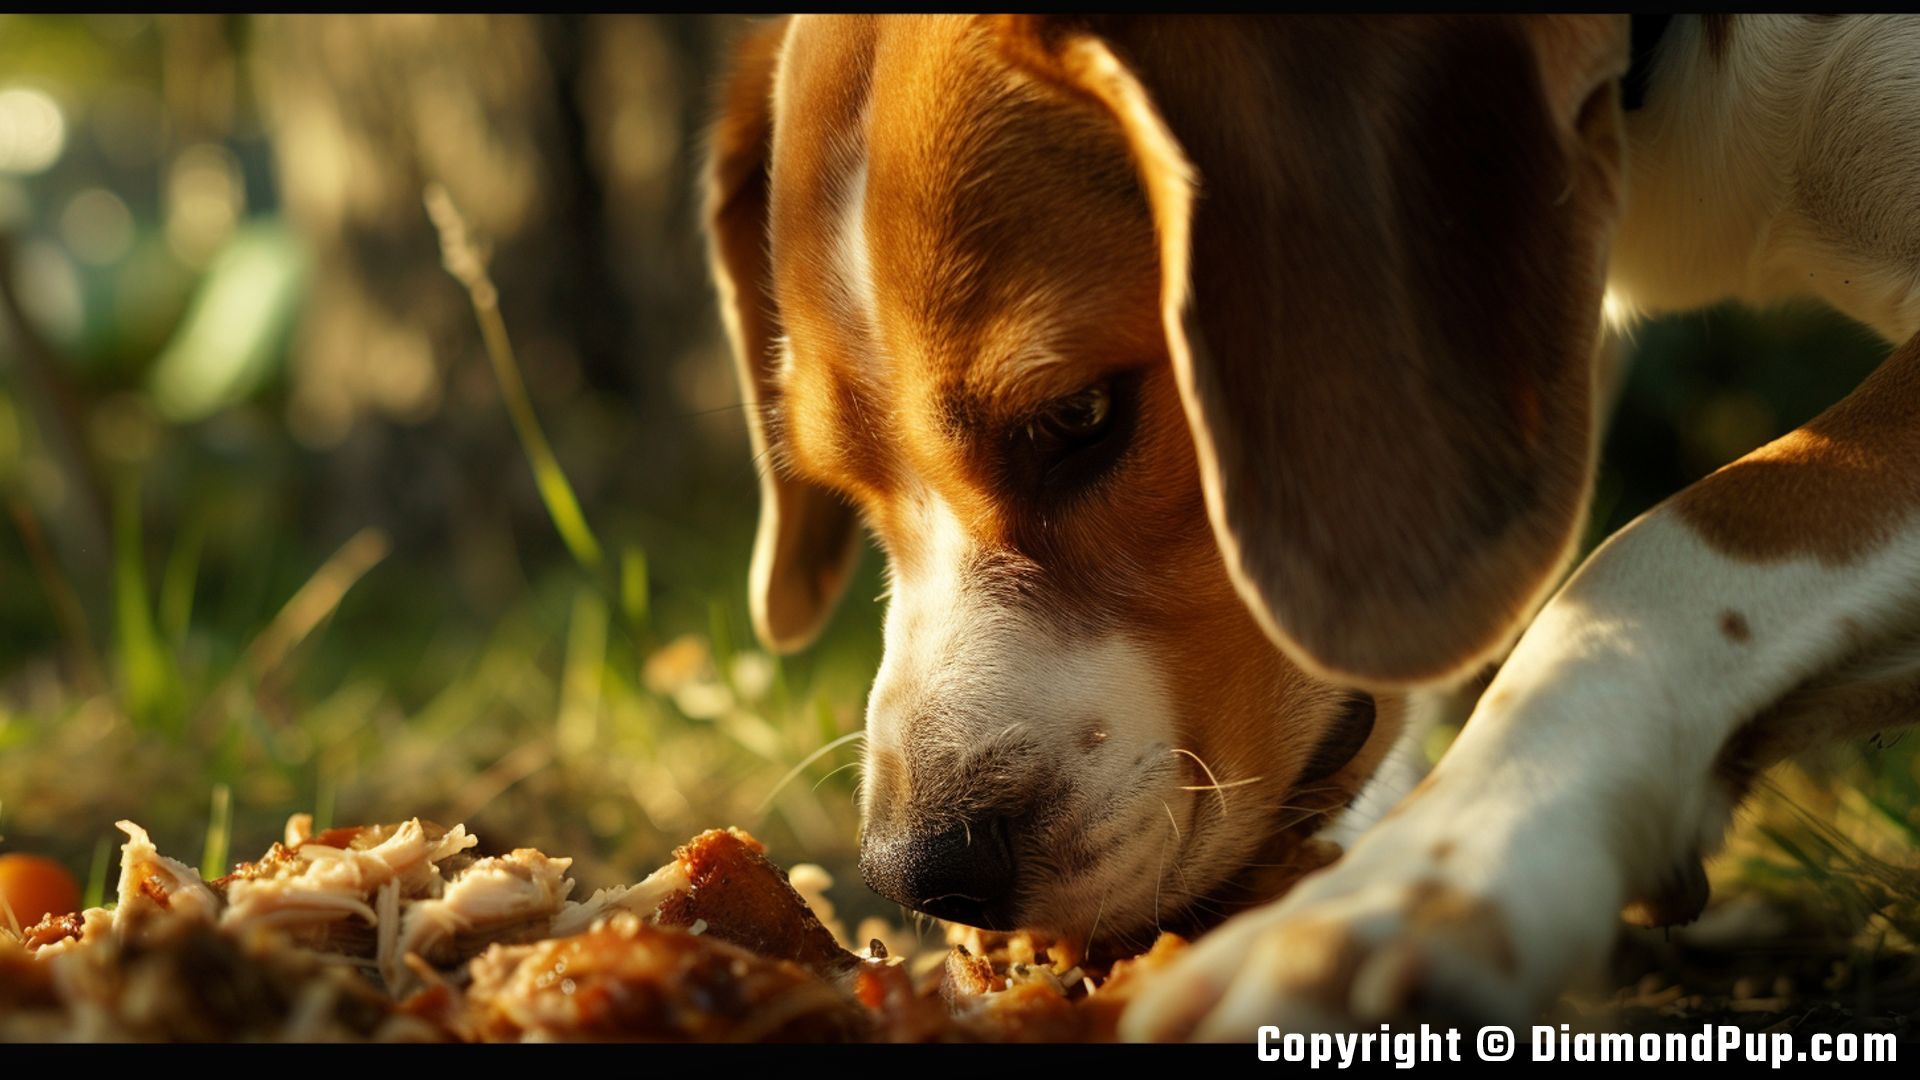 Photograph of a Cute Beagle Snacking on Chicken